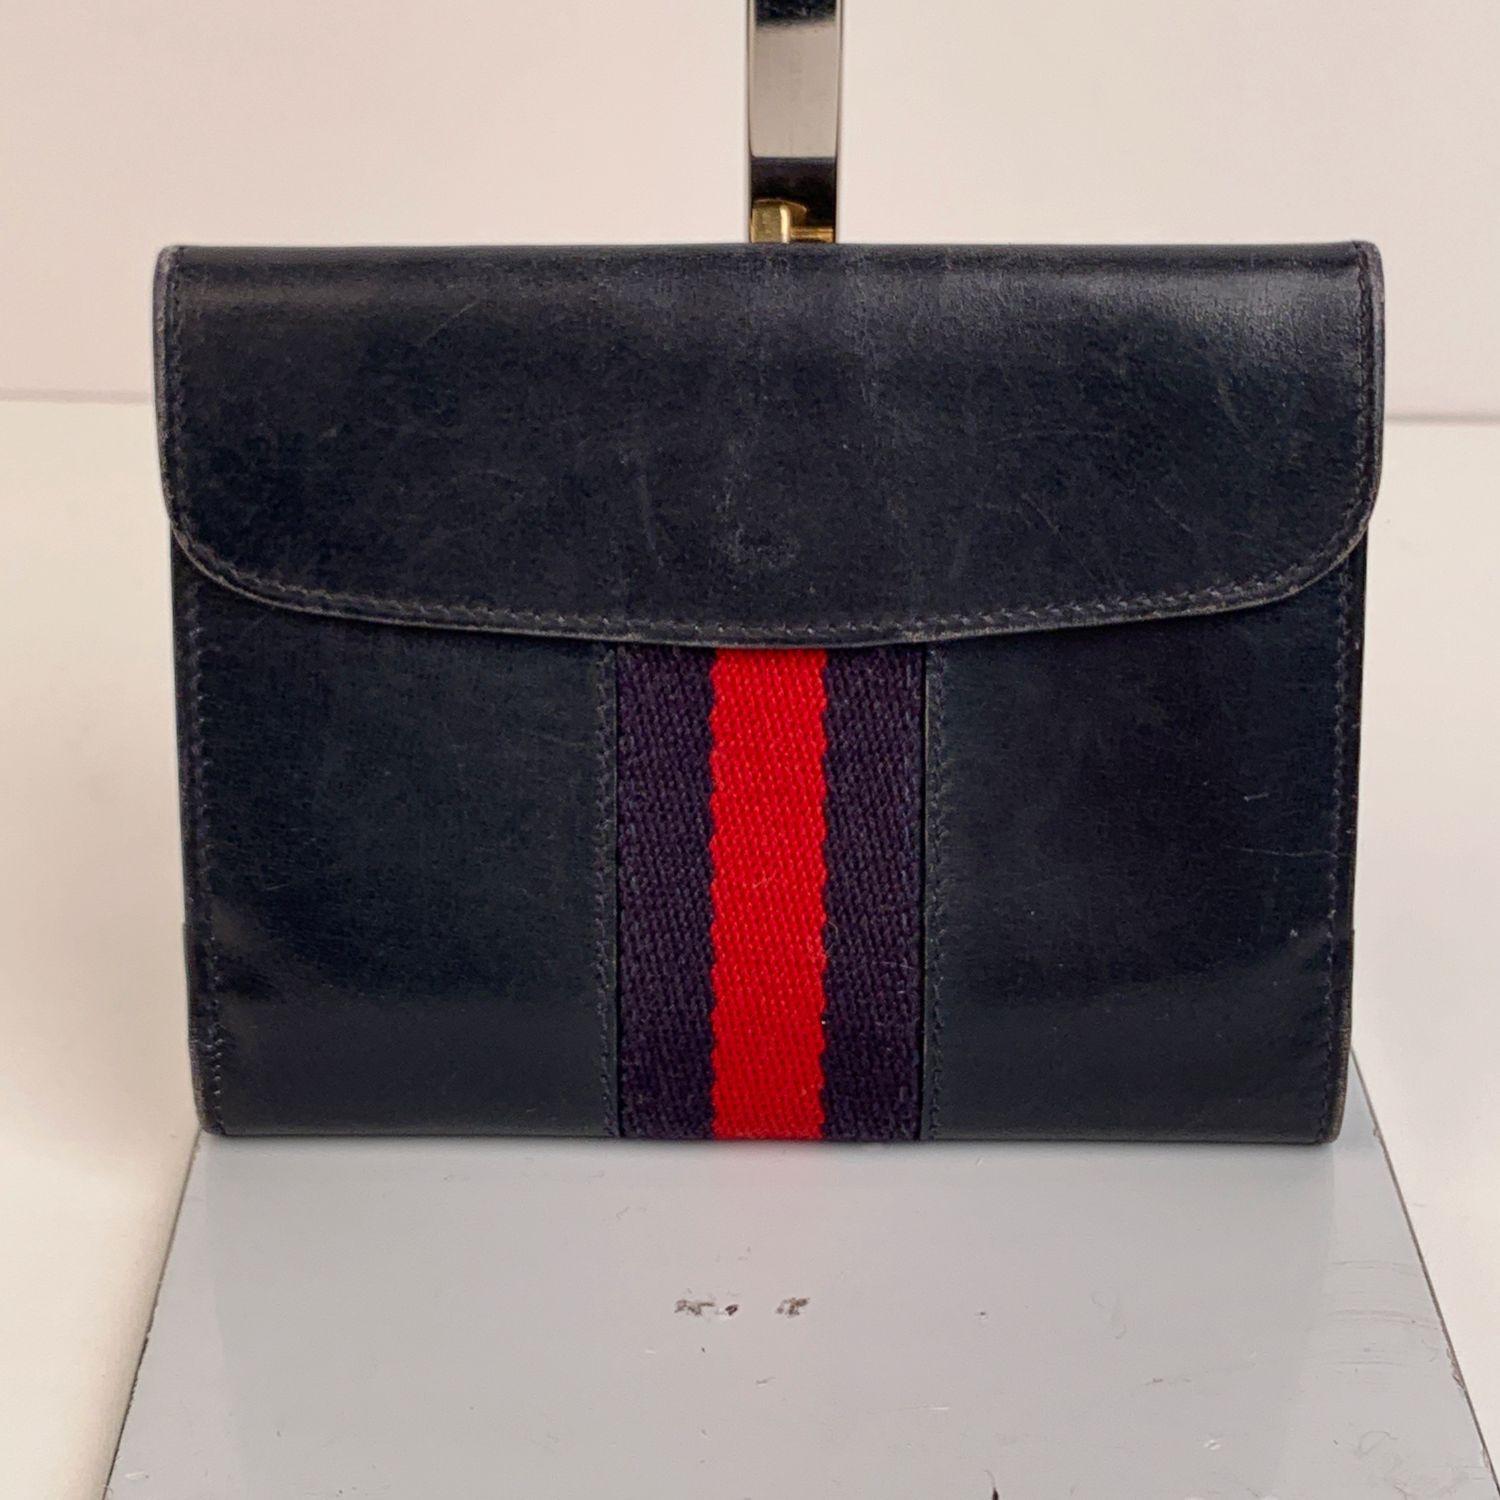 Vintage Gucci compact wallet, crafted in blue leather with blue/red/blue stripes detailing. Gold metal enameled GG - GUCCI clasp closure. Back coin compartment with flap and snap button closure. It opens to a bill compartments and 4 open pockets.